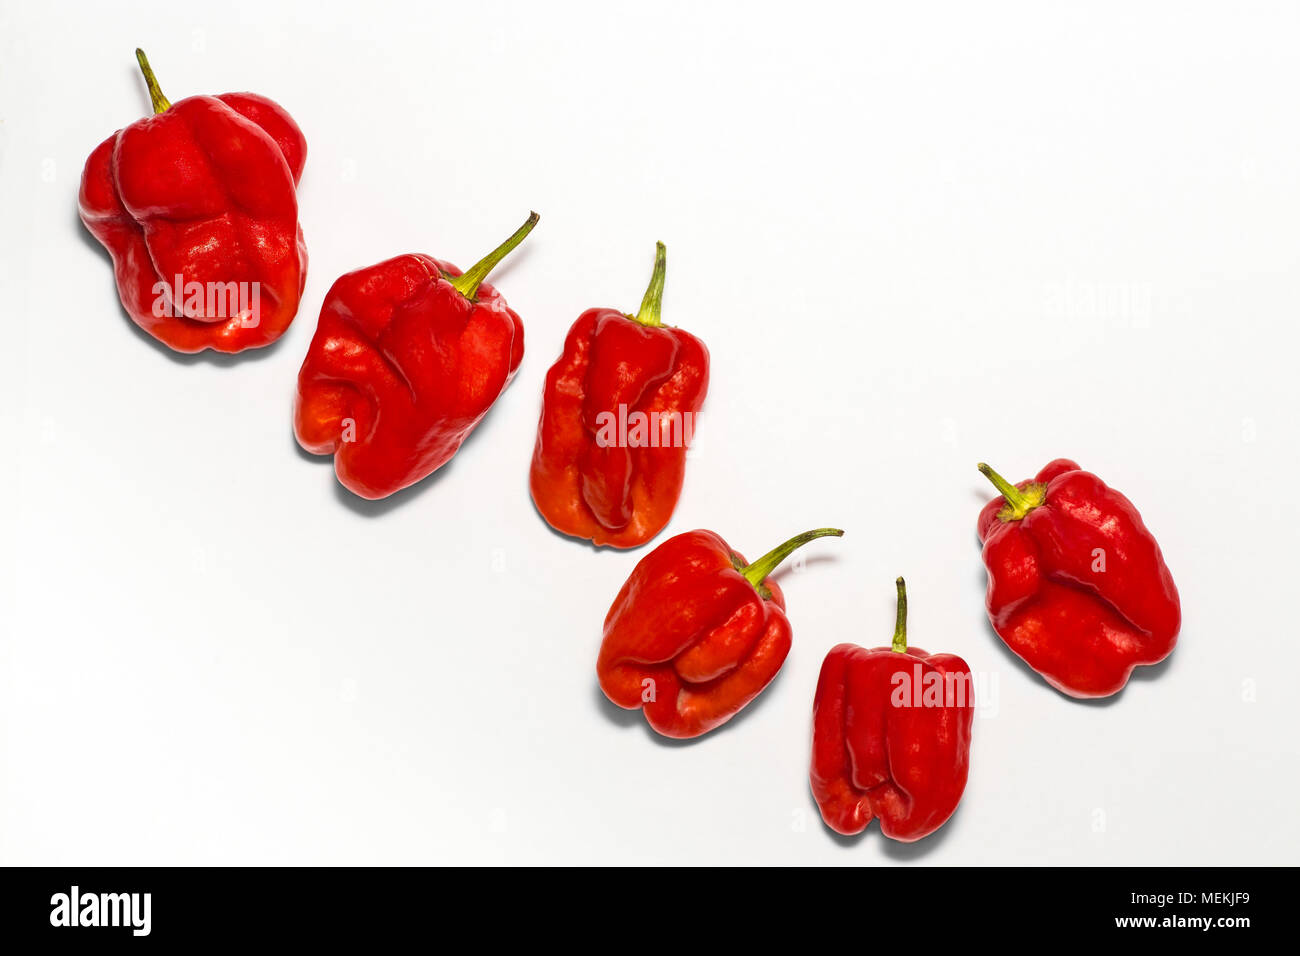 Selection of Red Habanero Chillies arranged on a white background with lots of copy space. Macro food photography image of red hot chili peppers Stock Photo